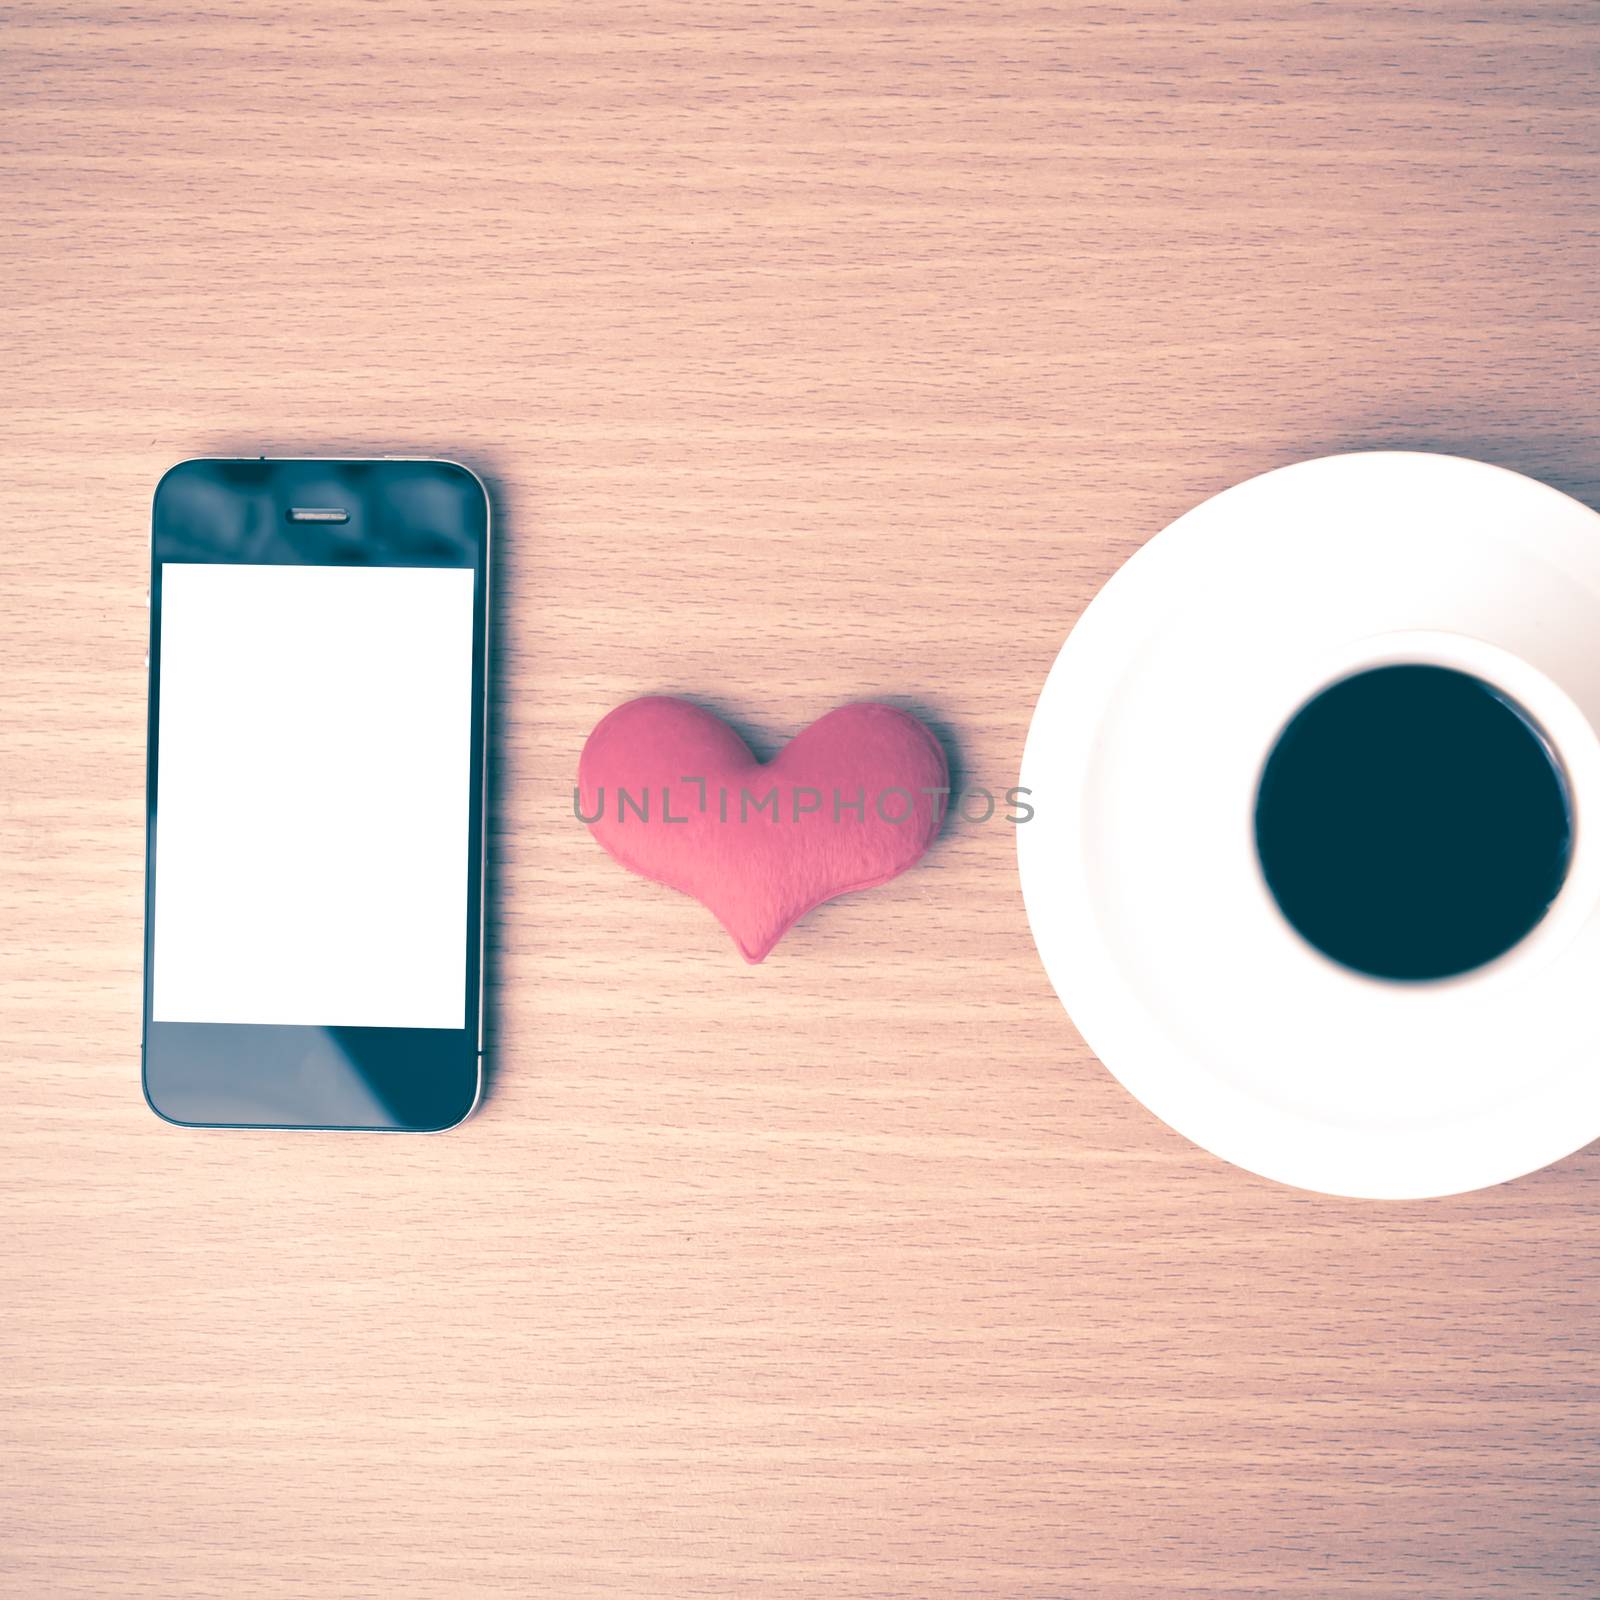 coffee cup and phone and heart on wood background vintage style